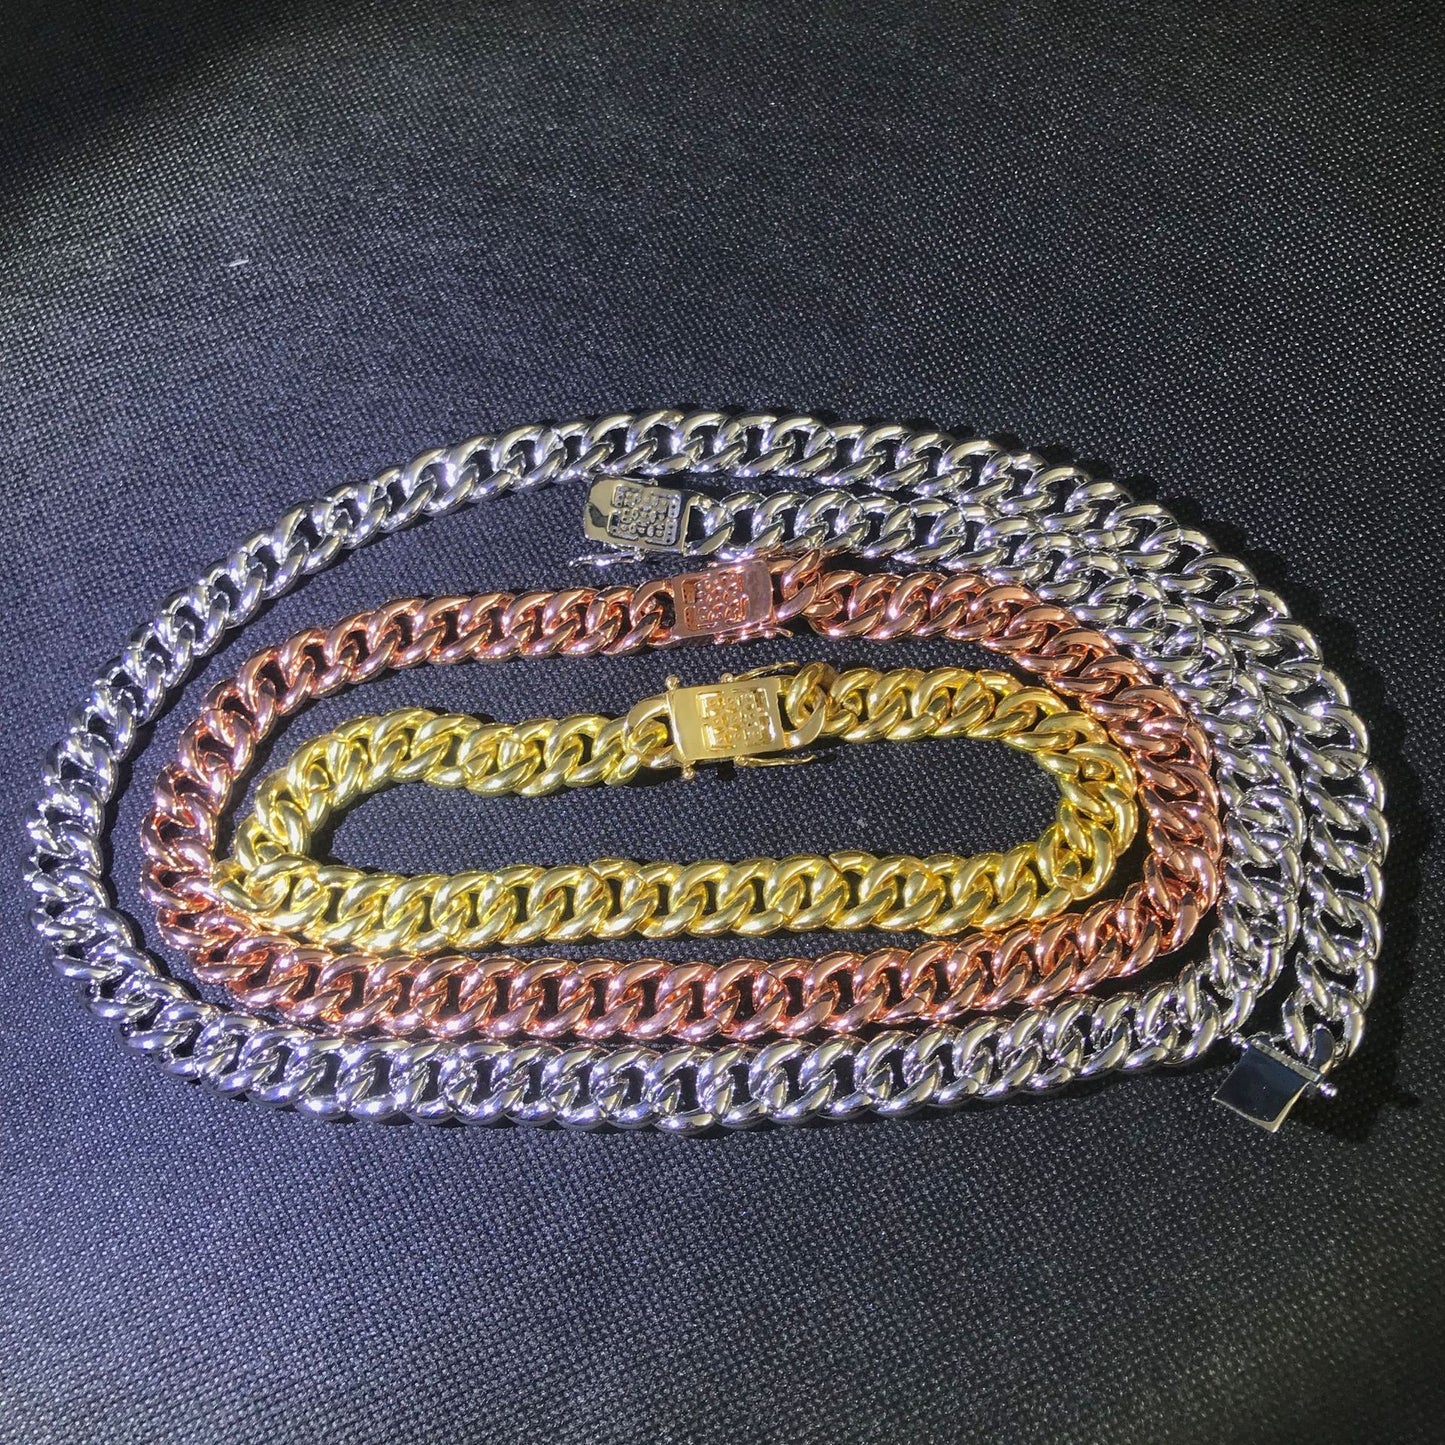 three different colored chains on a black surface